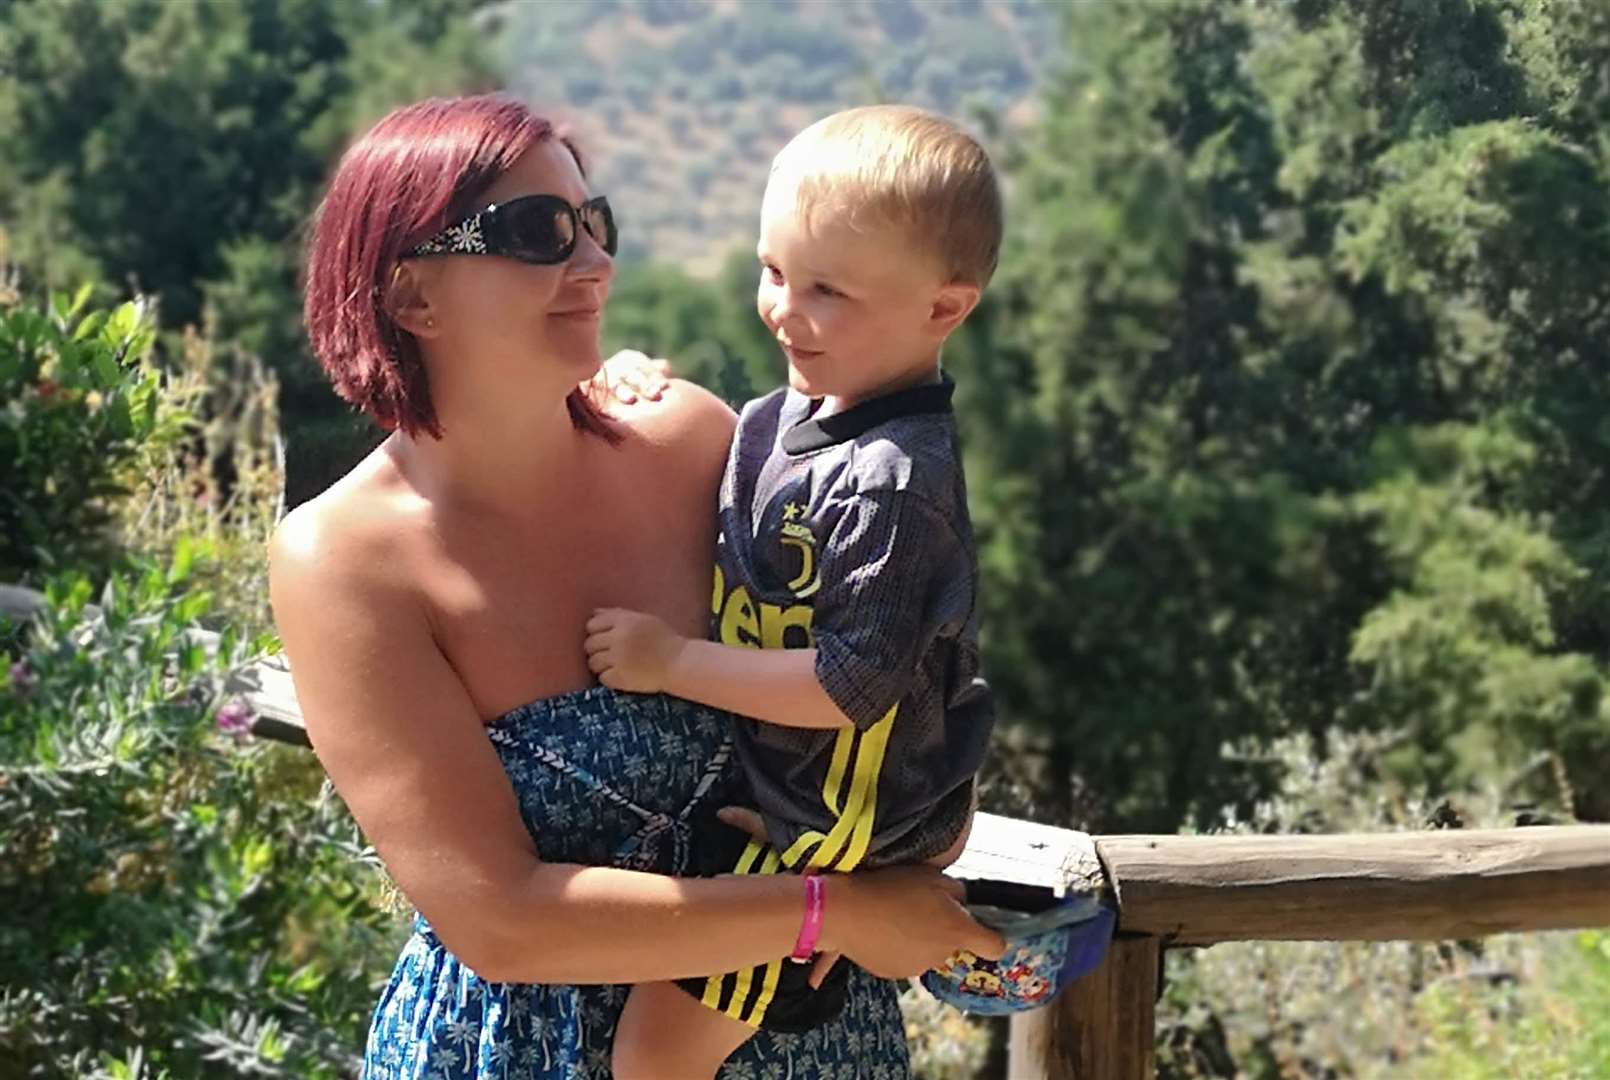 Mrs Olley and her son Joseph, pictured on their 2019 trip to Kos.